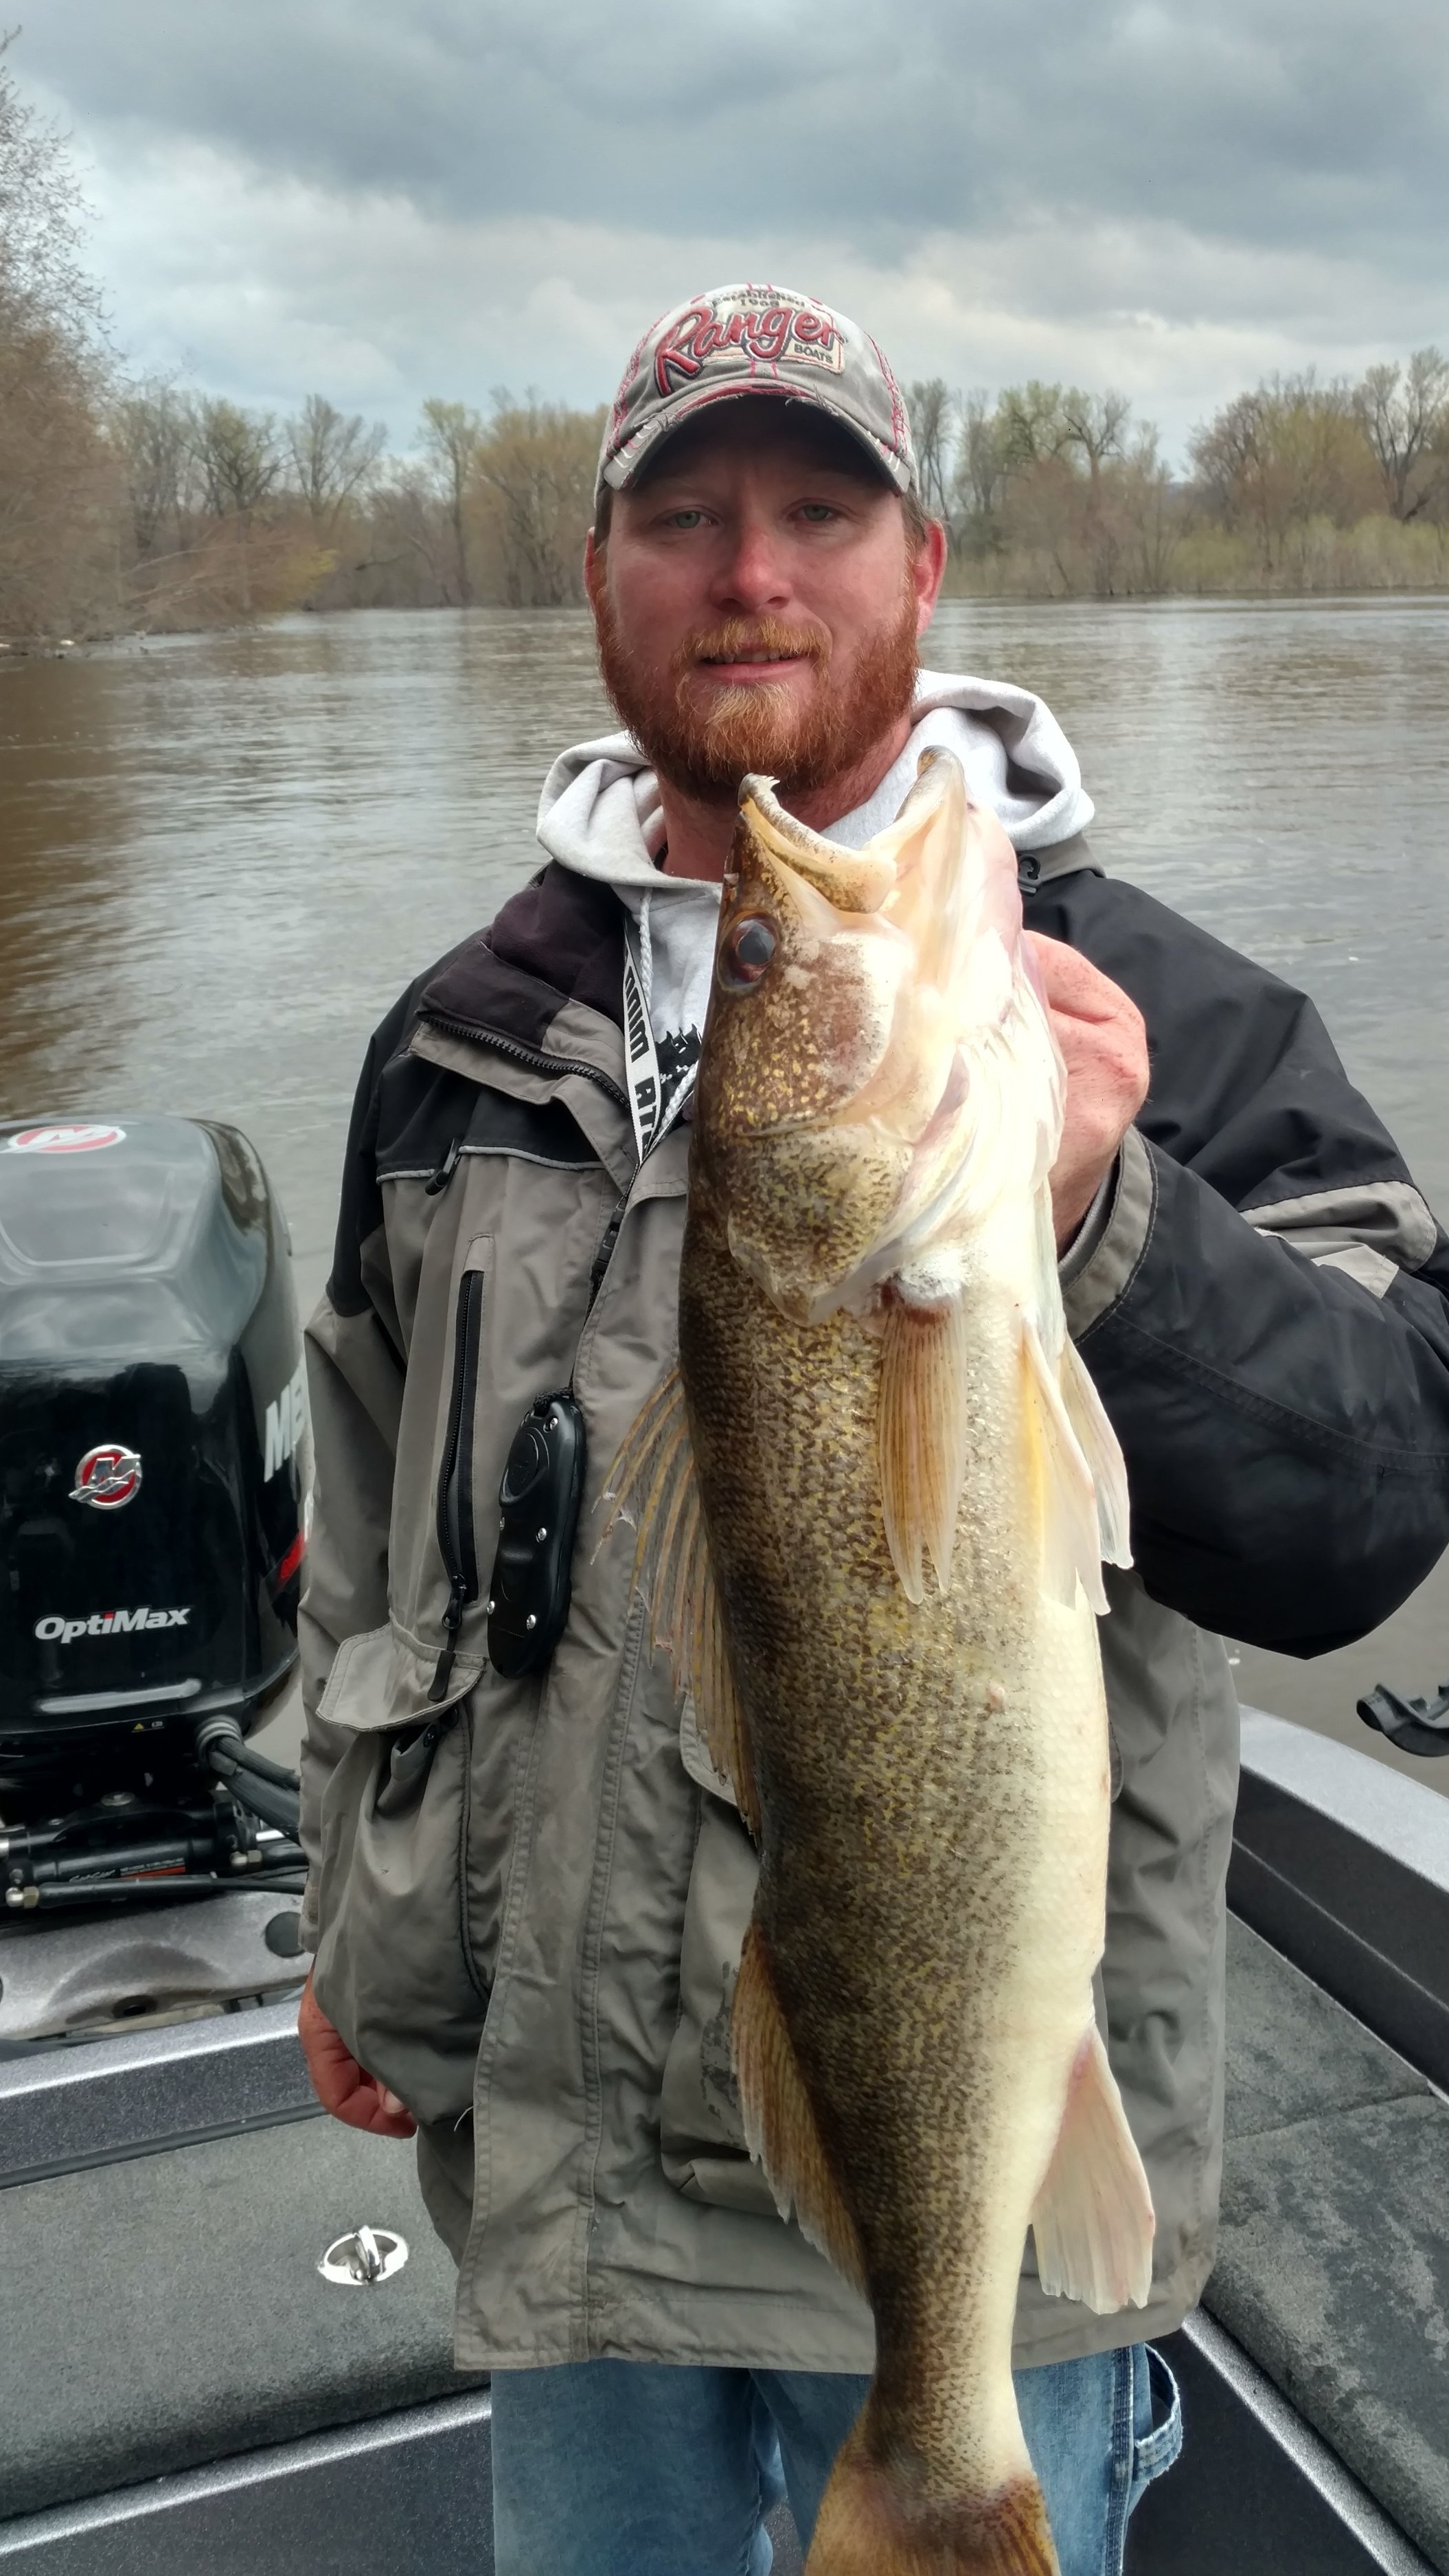 Mississippi River Pool 4 and Lake Pepin Fishing Guide for Walleye